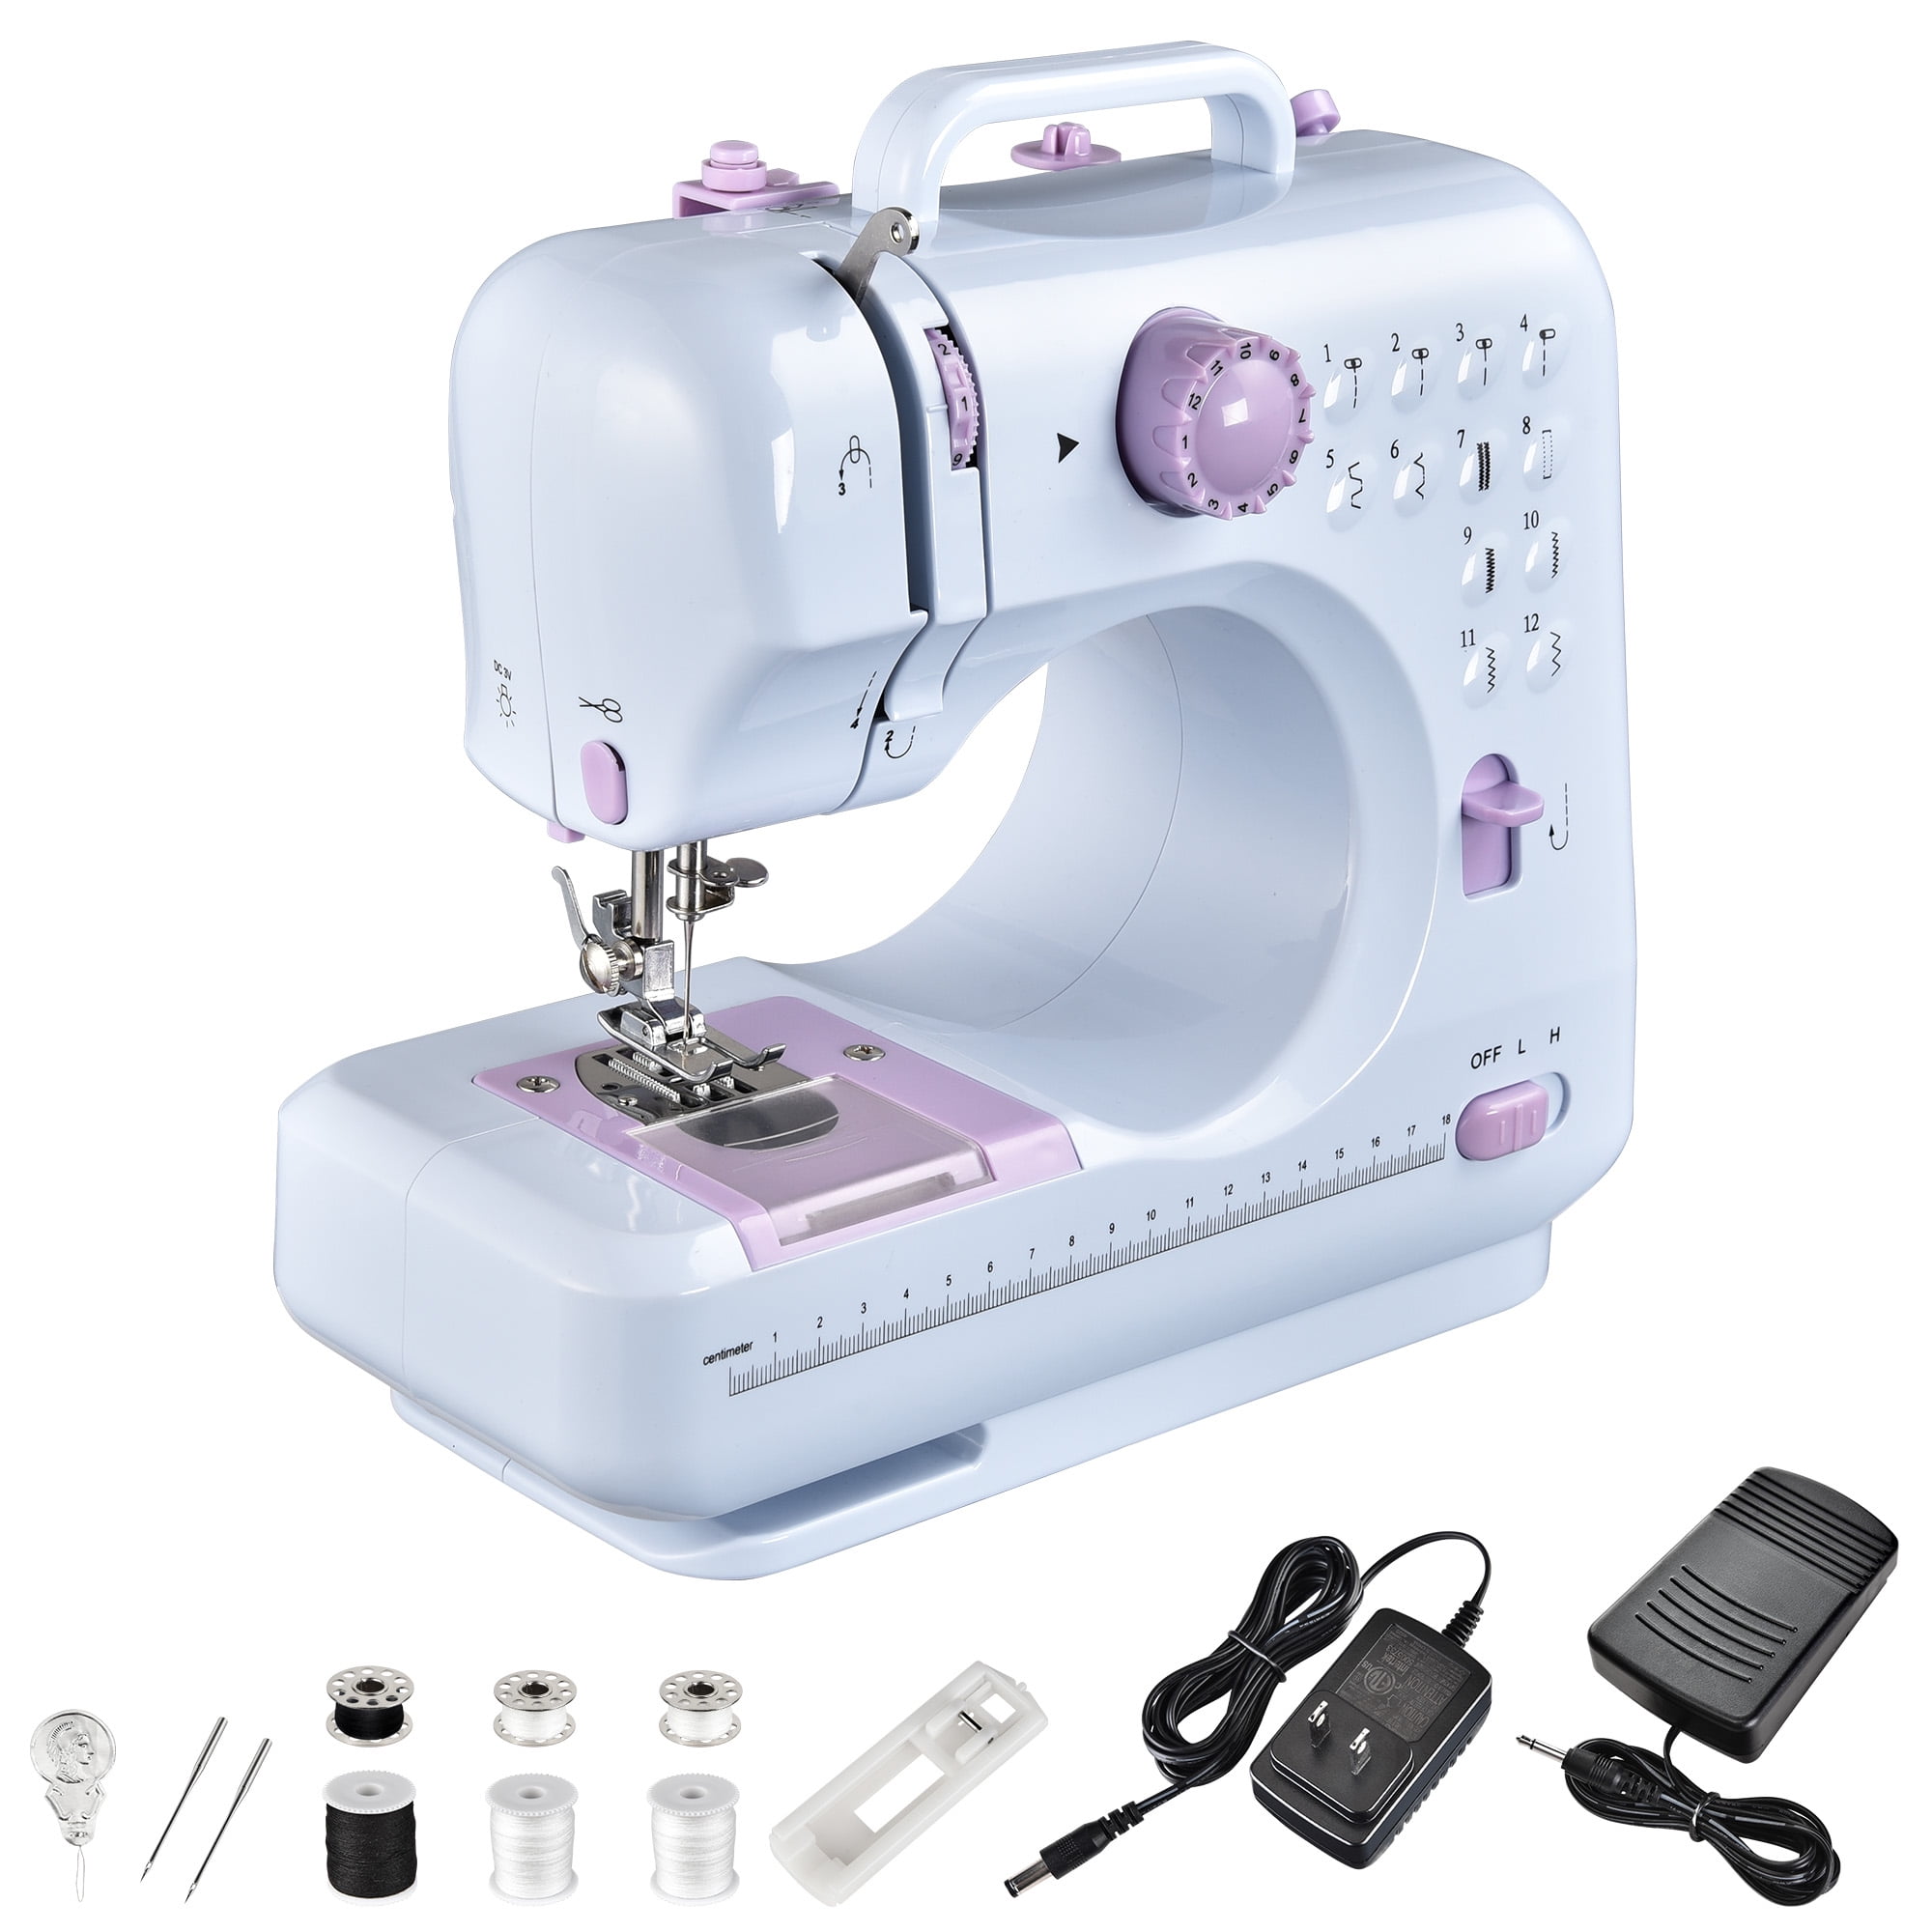 US Electric Desktop Sewing Machine 12 Stitches House Tailor 2 Speed Xmas Gift 